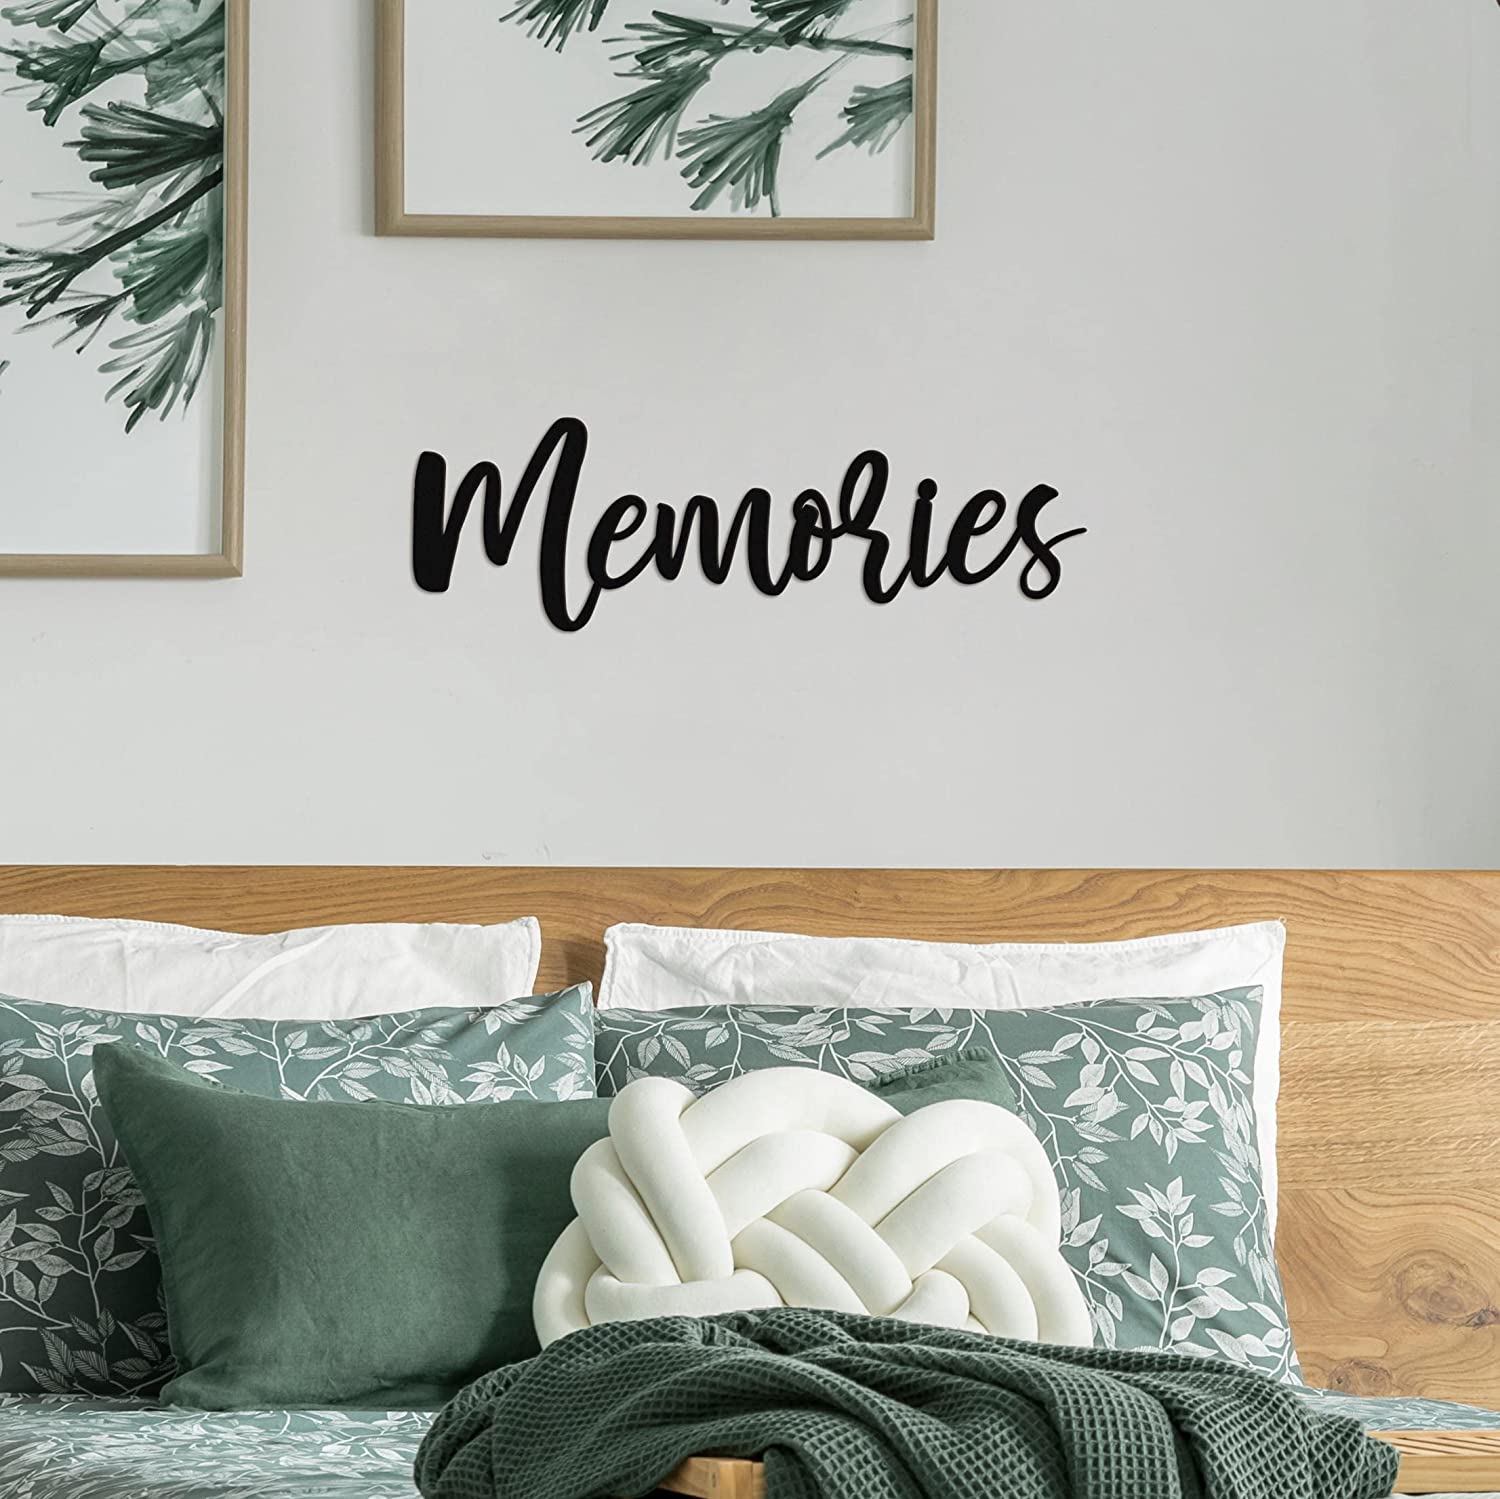 Memories Wall Decor Metal Art Piece - 17"X5" Memories Sign Metal Cut Out Signs From Durable Powder-Coated Metal, Perfect for Home Wall Decor Signs In Rustic Wall Decor